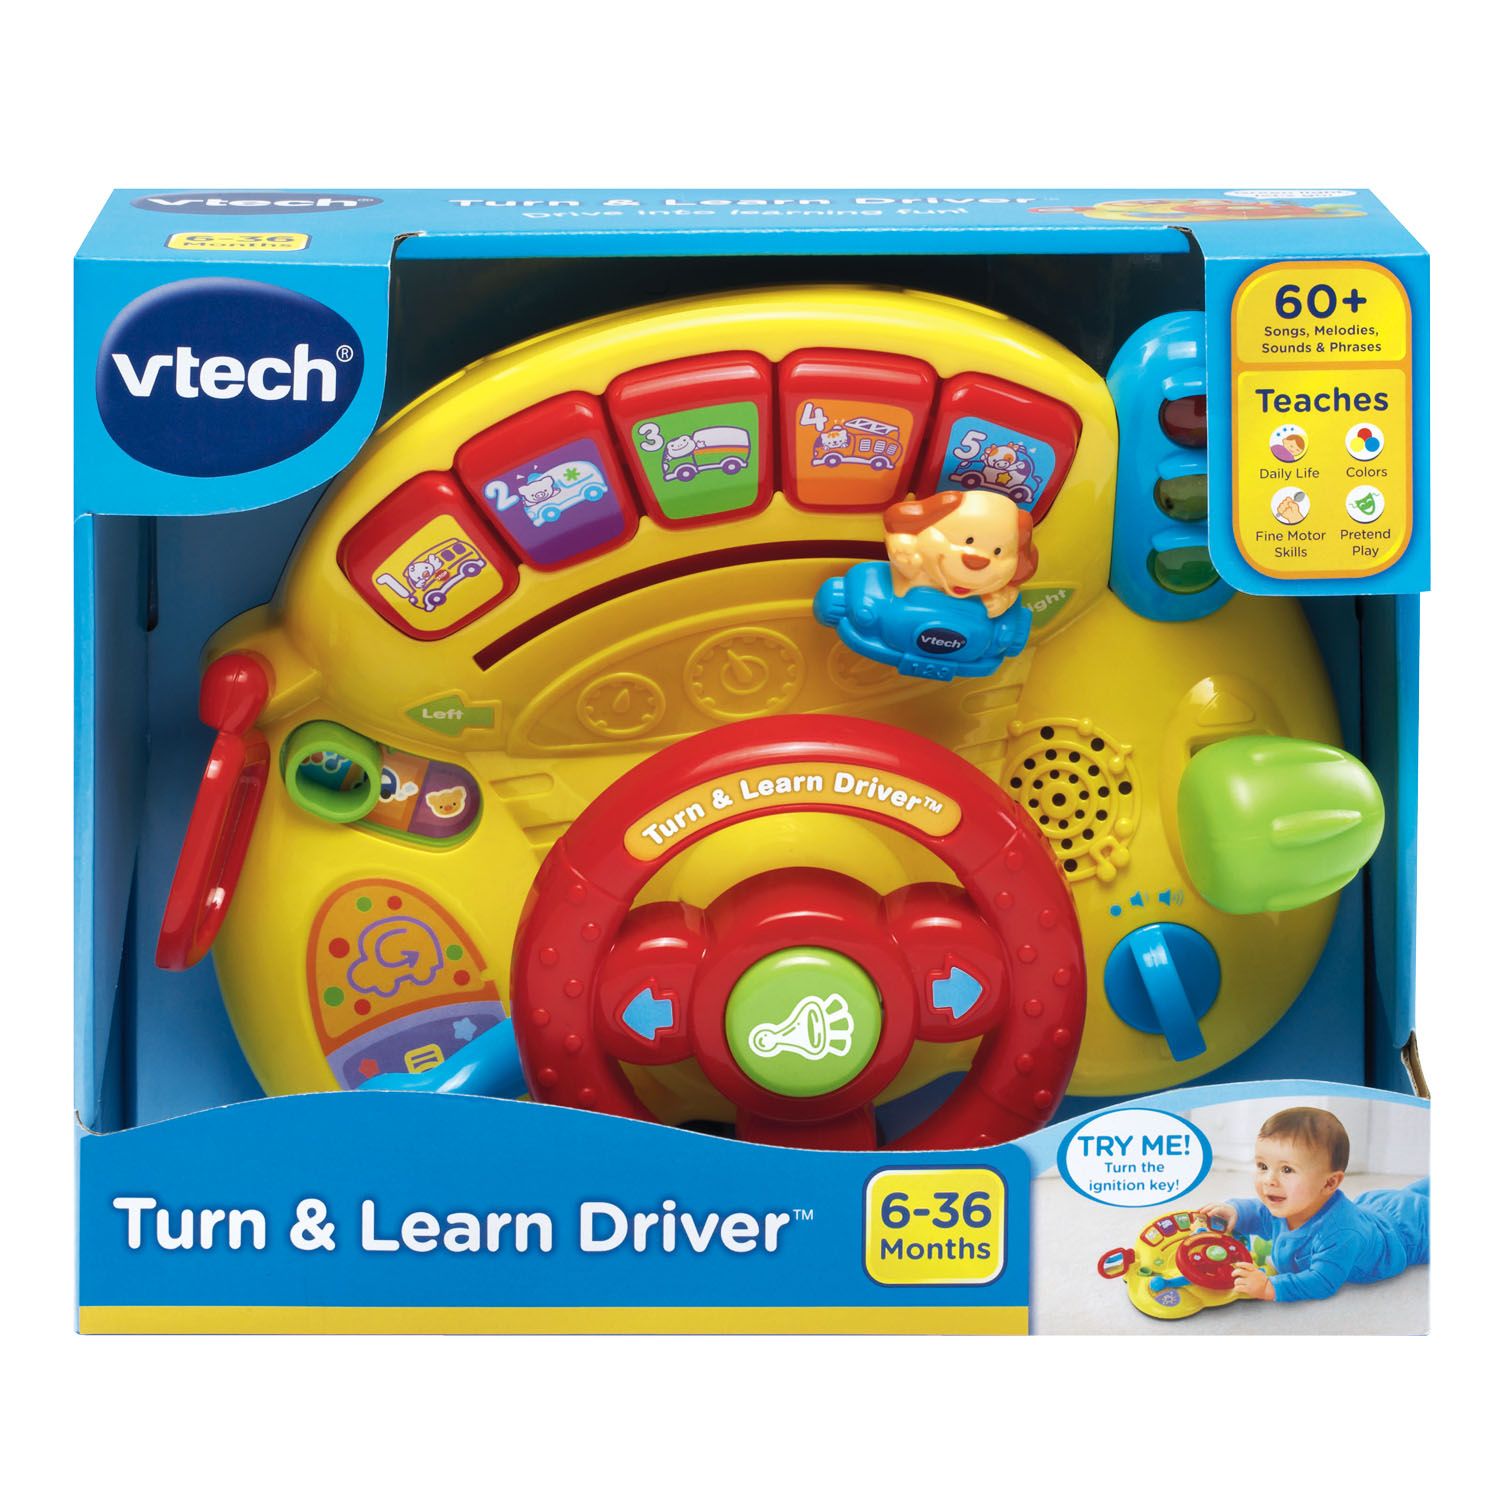 vtech baby turn and learn cube